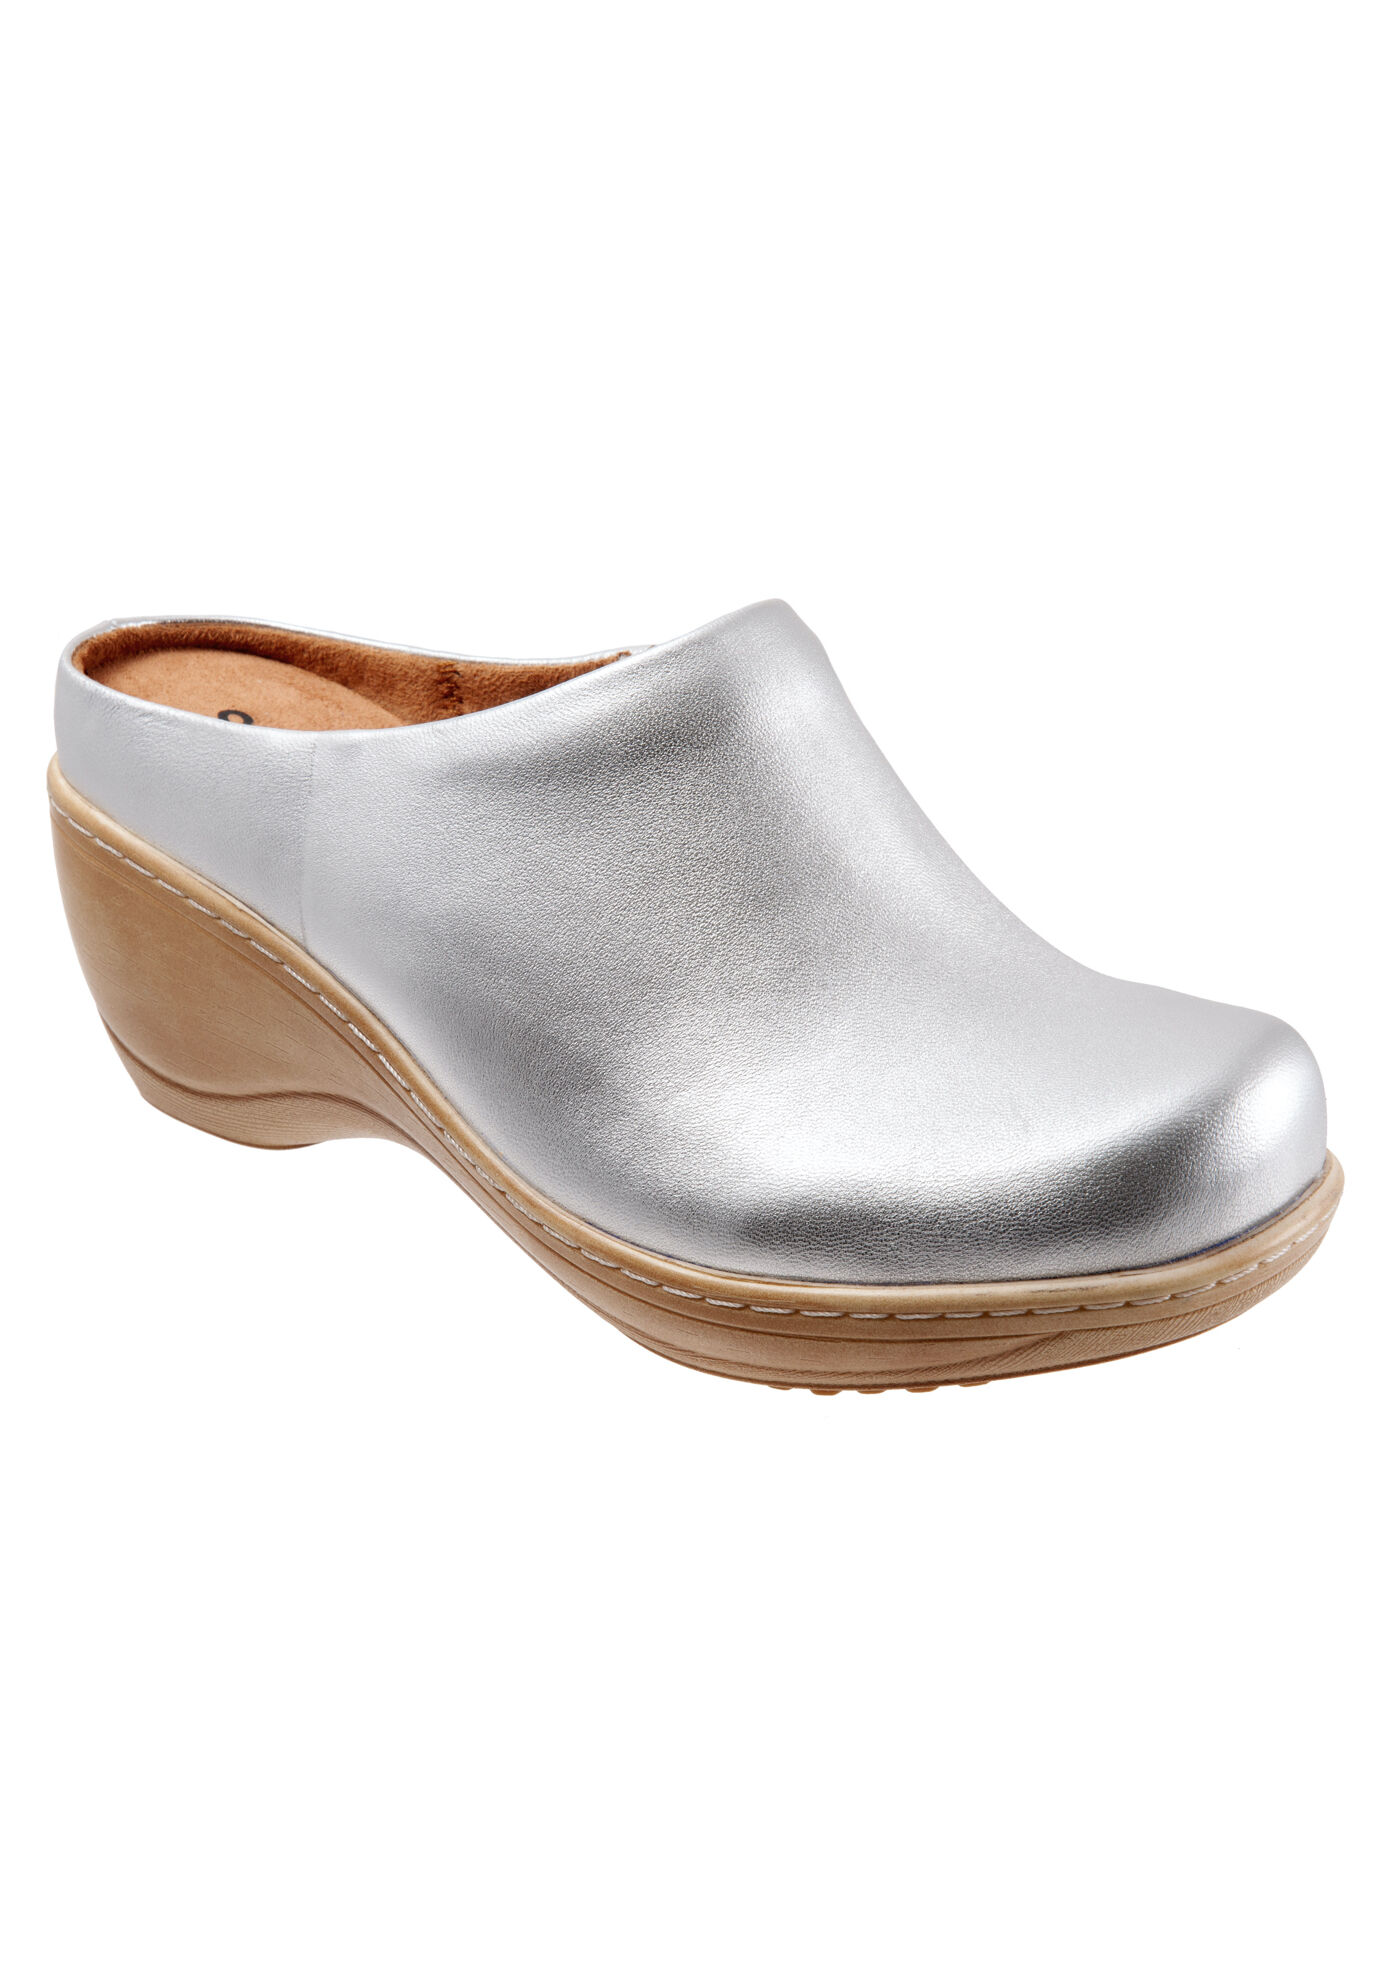 Extra Wide Width Women's Madison Clog by SoftWalk in Silver (Size 9 WW)